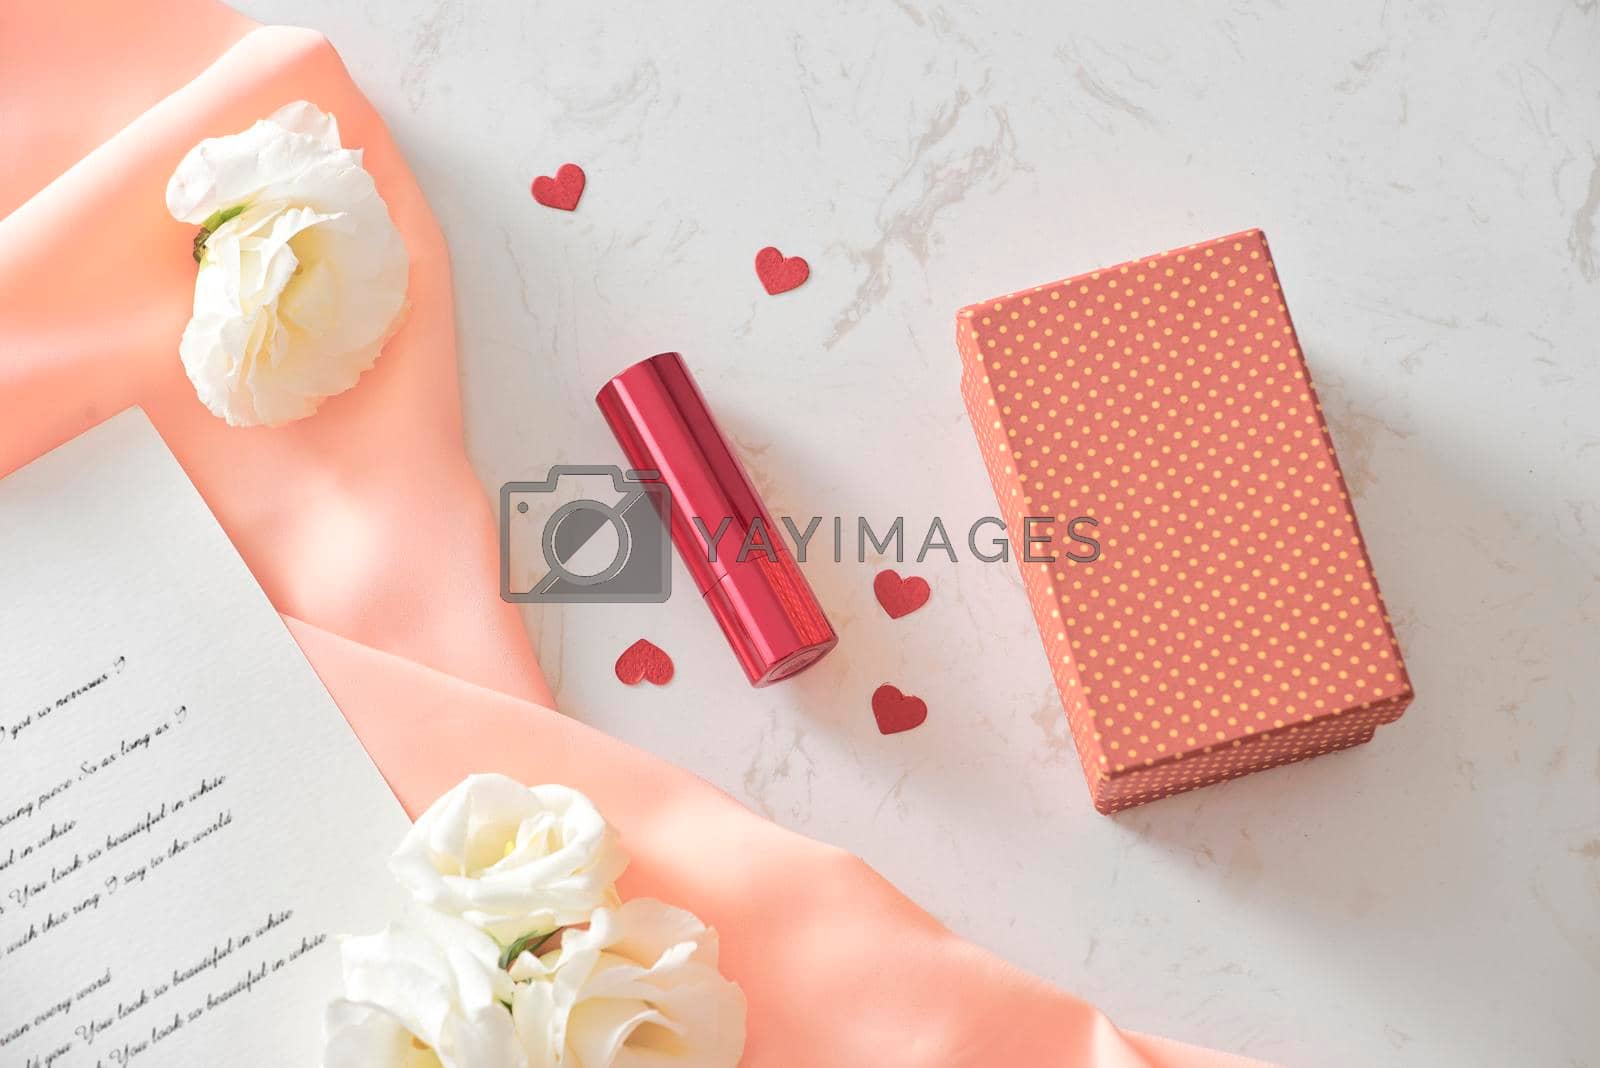 Royalty free image of Happy Valentine's Day concept on vintage paper sheet with lipstick by makidotvn